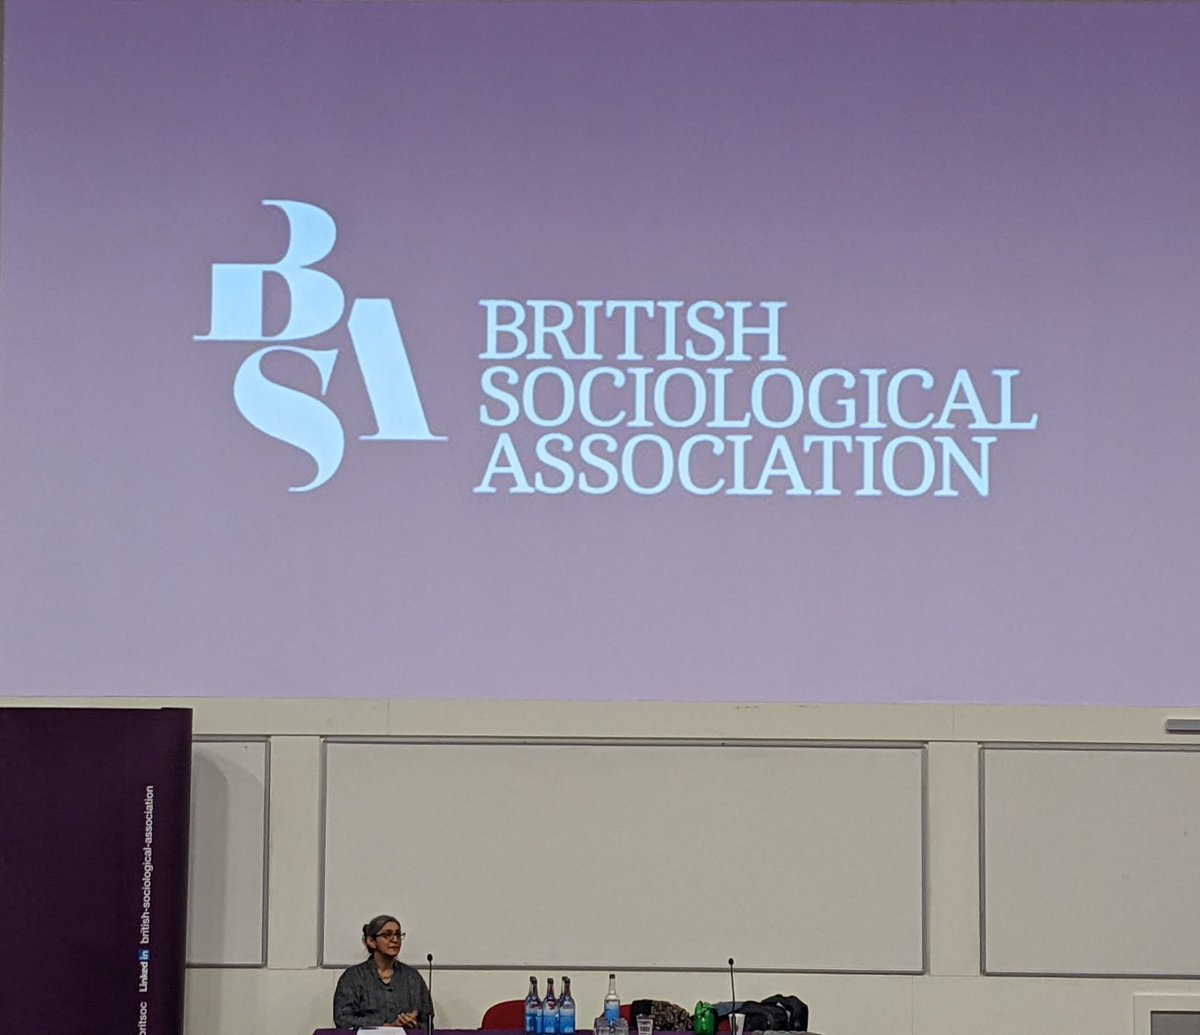 I've come, I've presented and now I'm relaxed and ready to listen to @GKBhambra #britsoc23